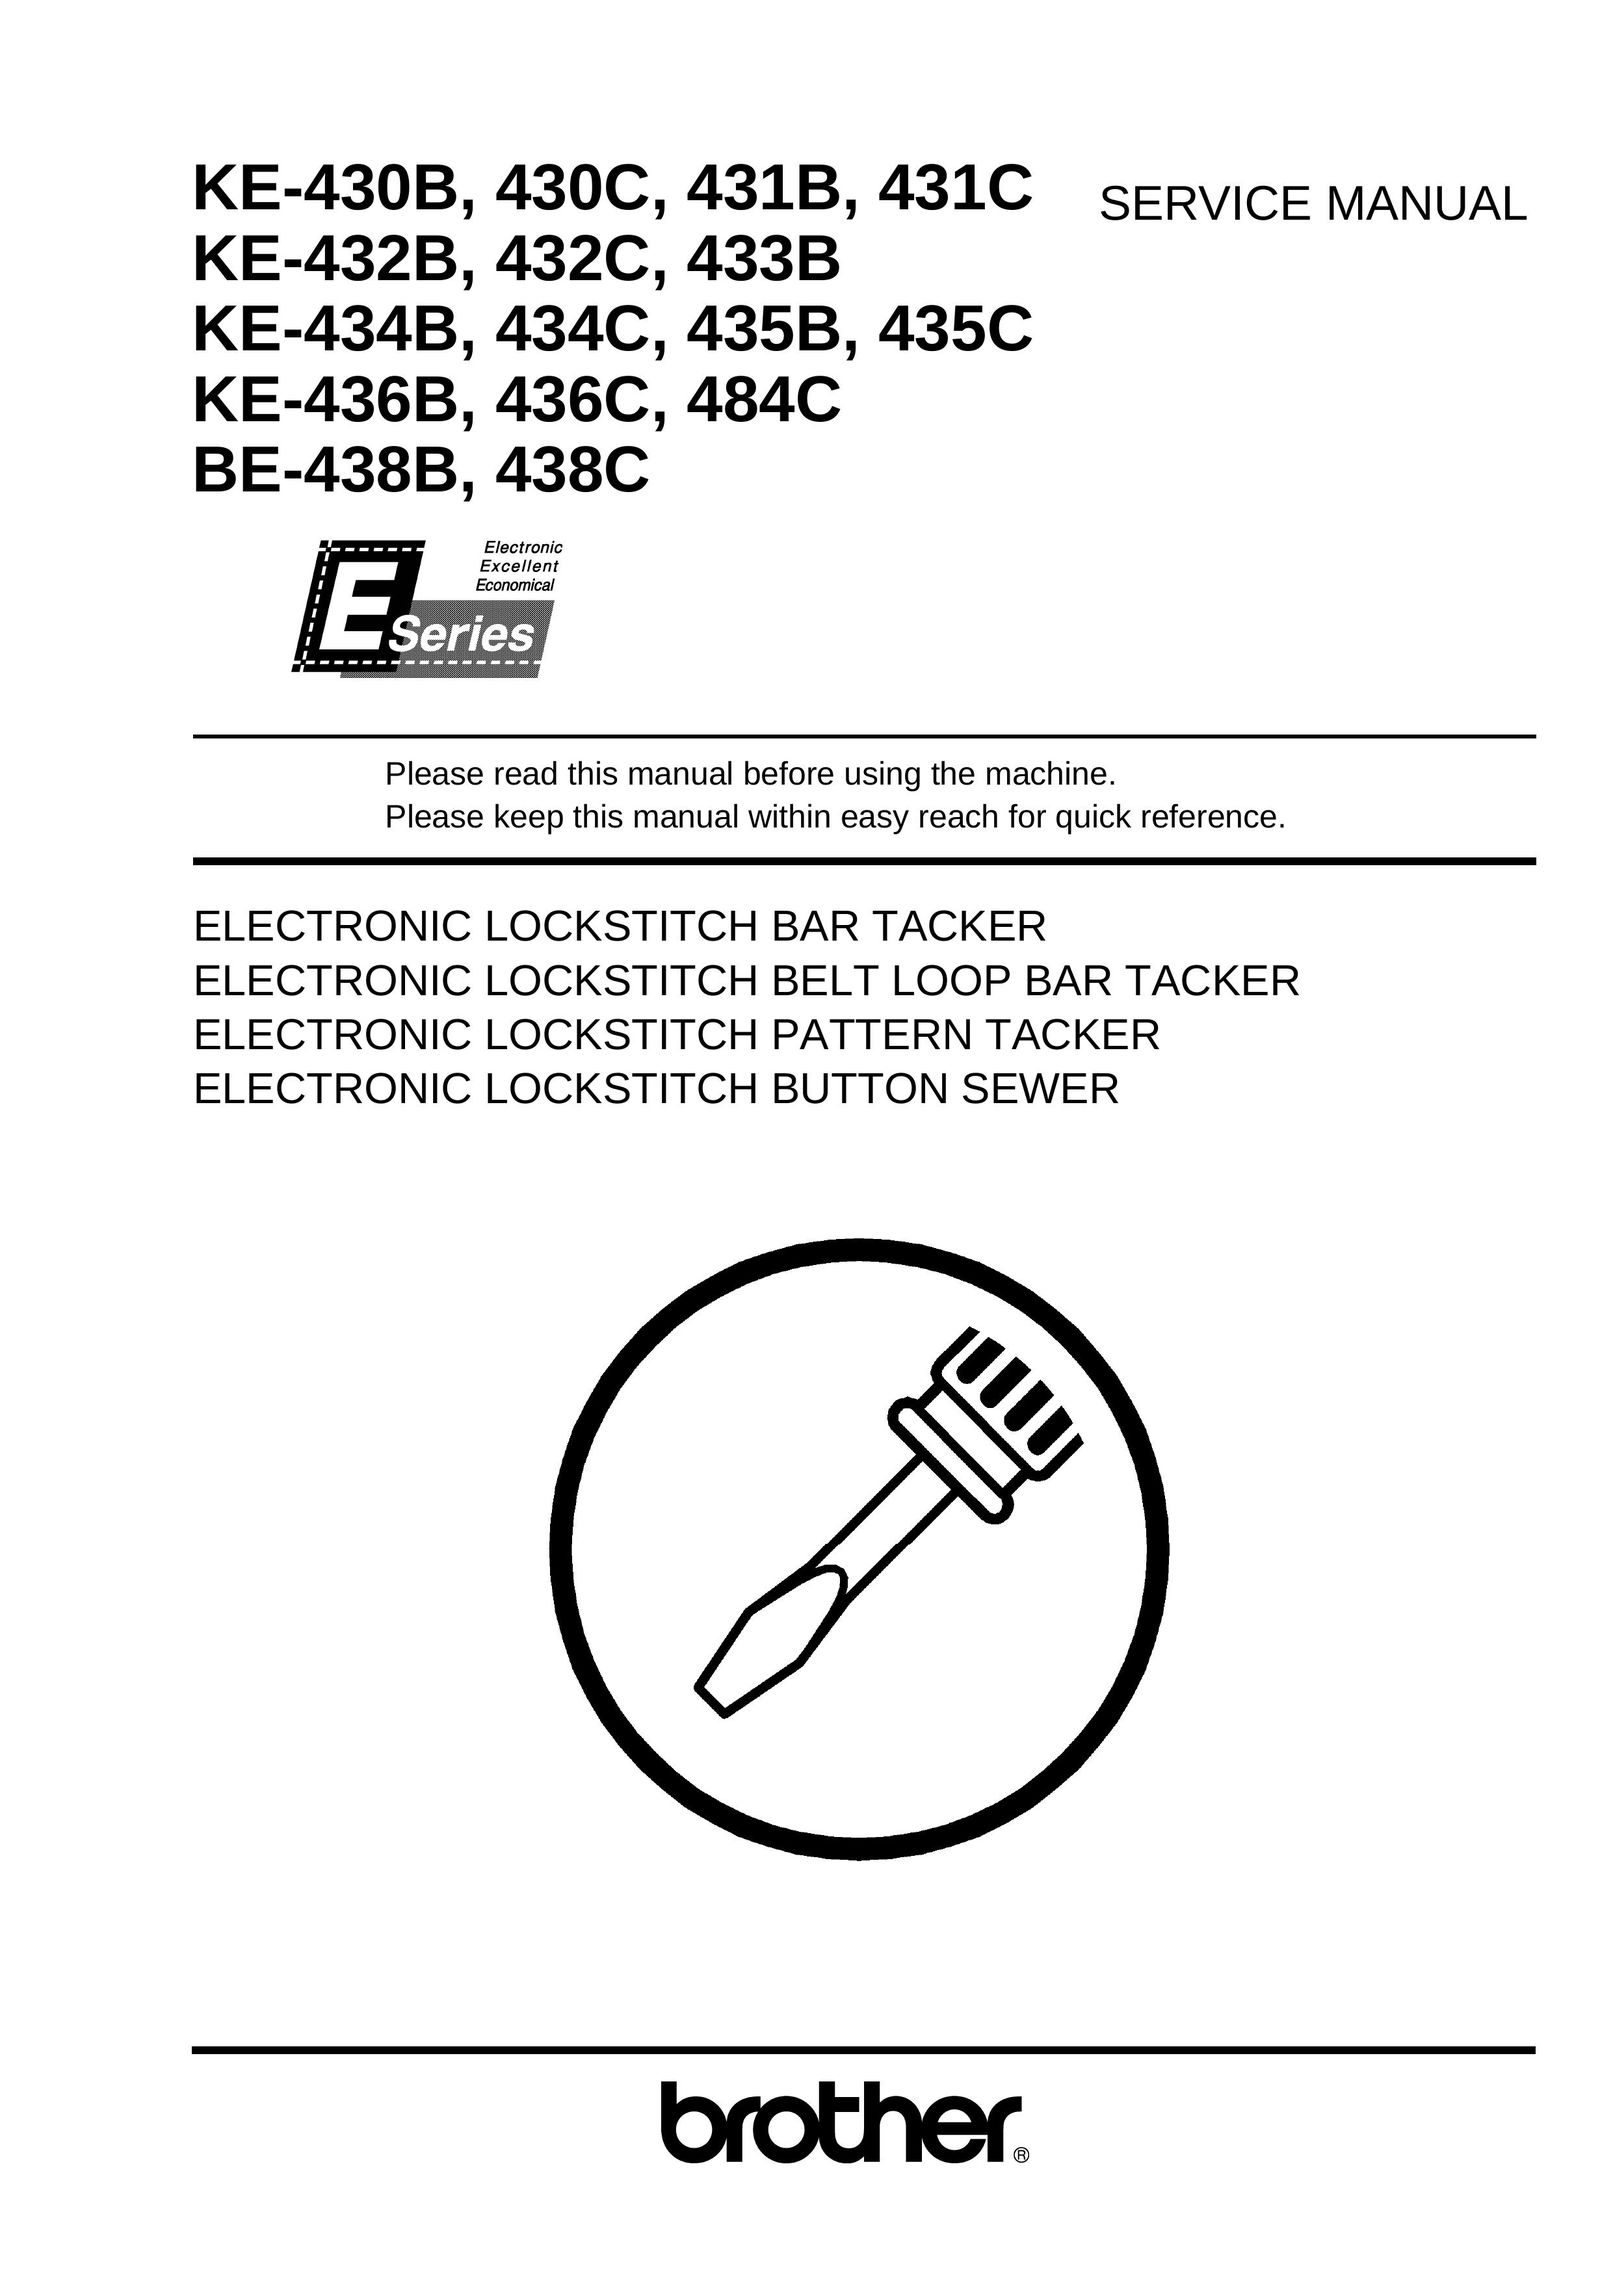 Brother 434C Sewing Machine User Manual (Page 1)